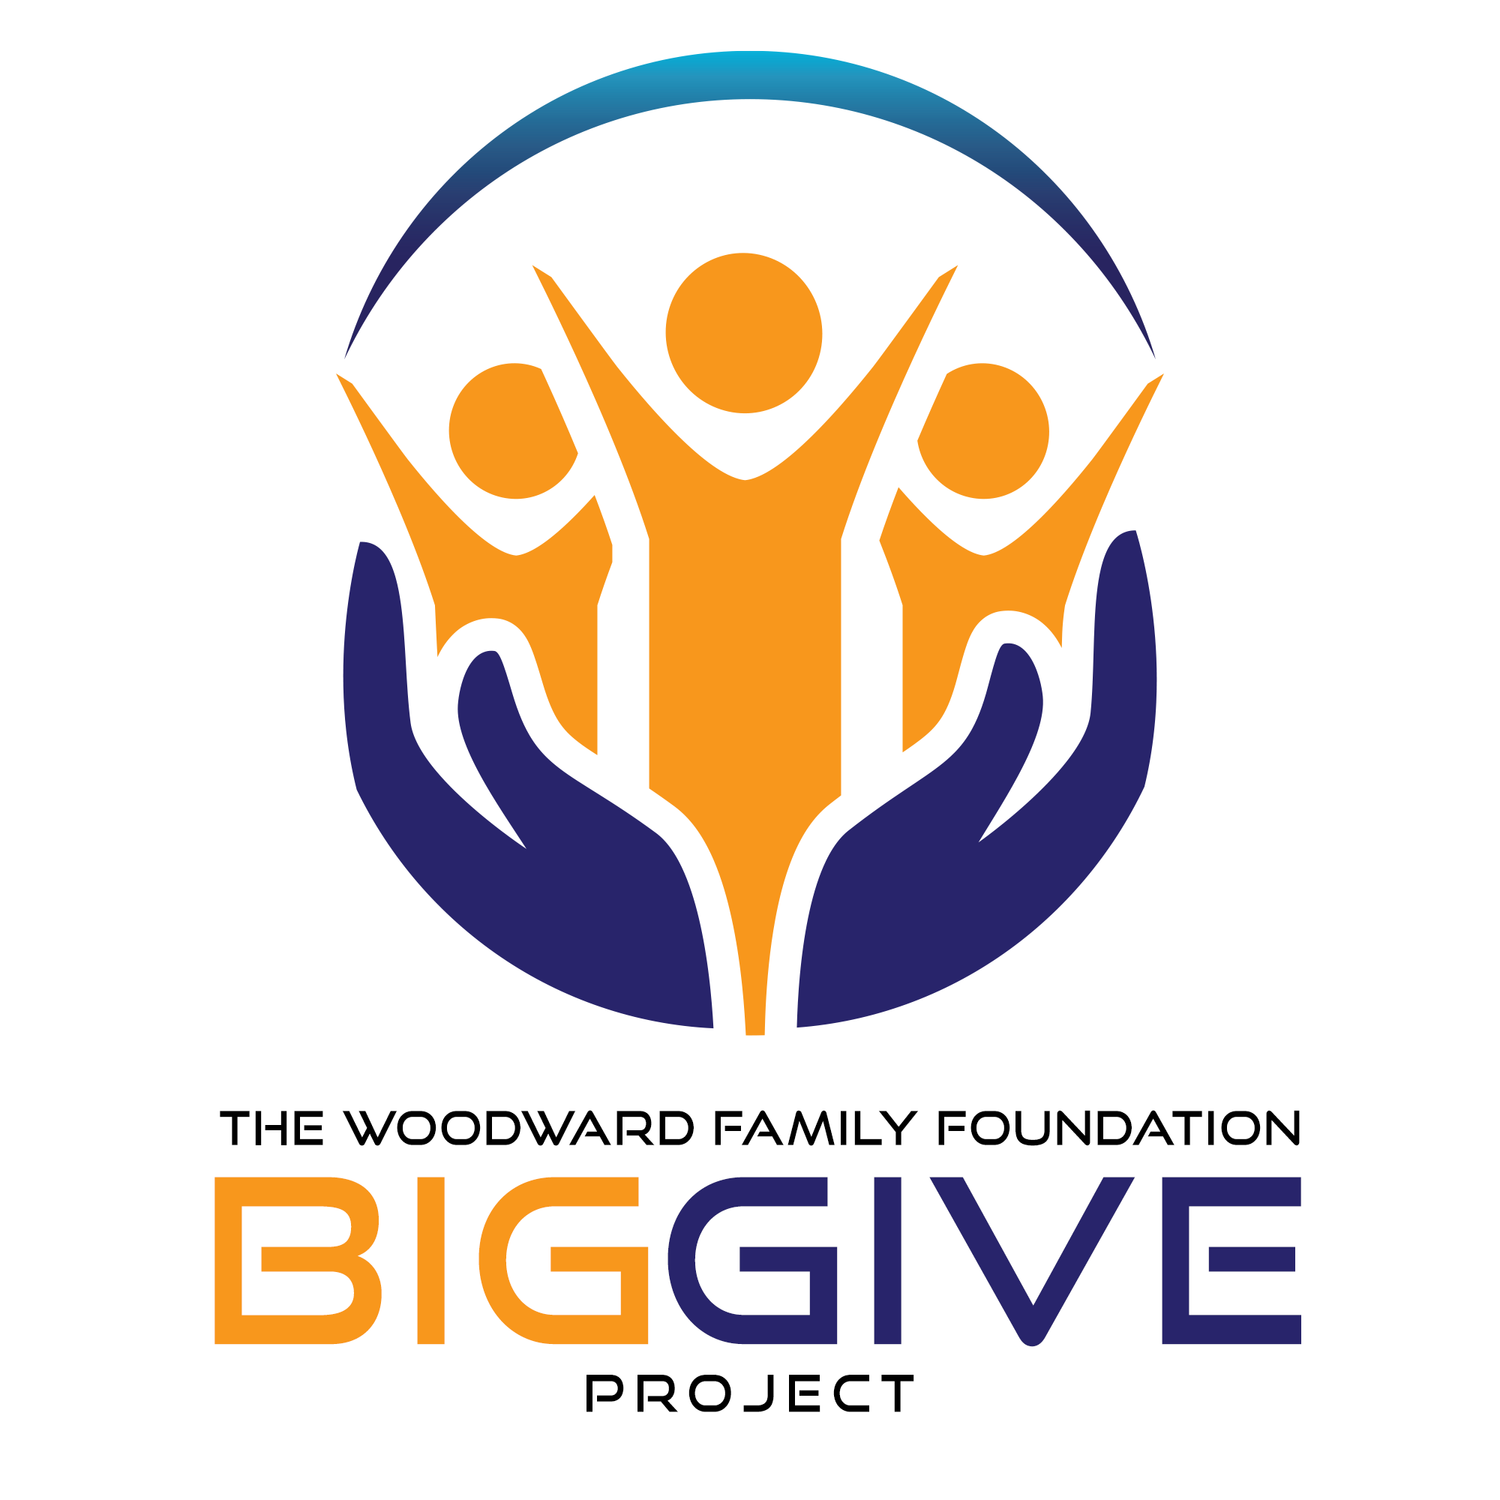 THE BIG GIVE PROJECT